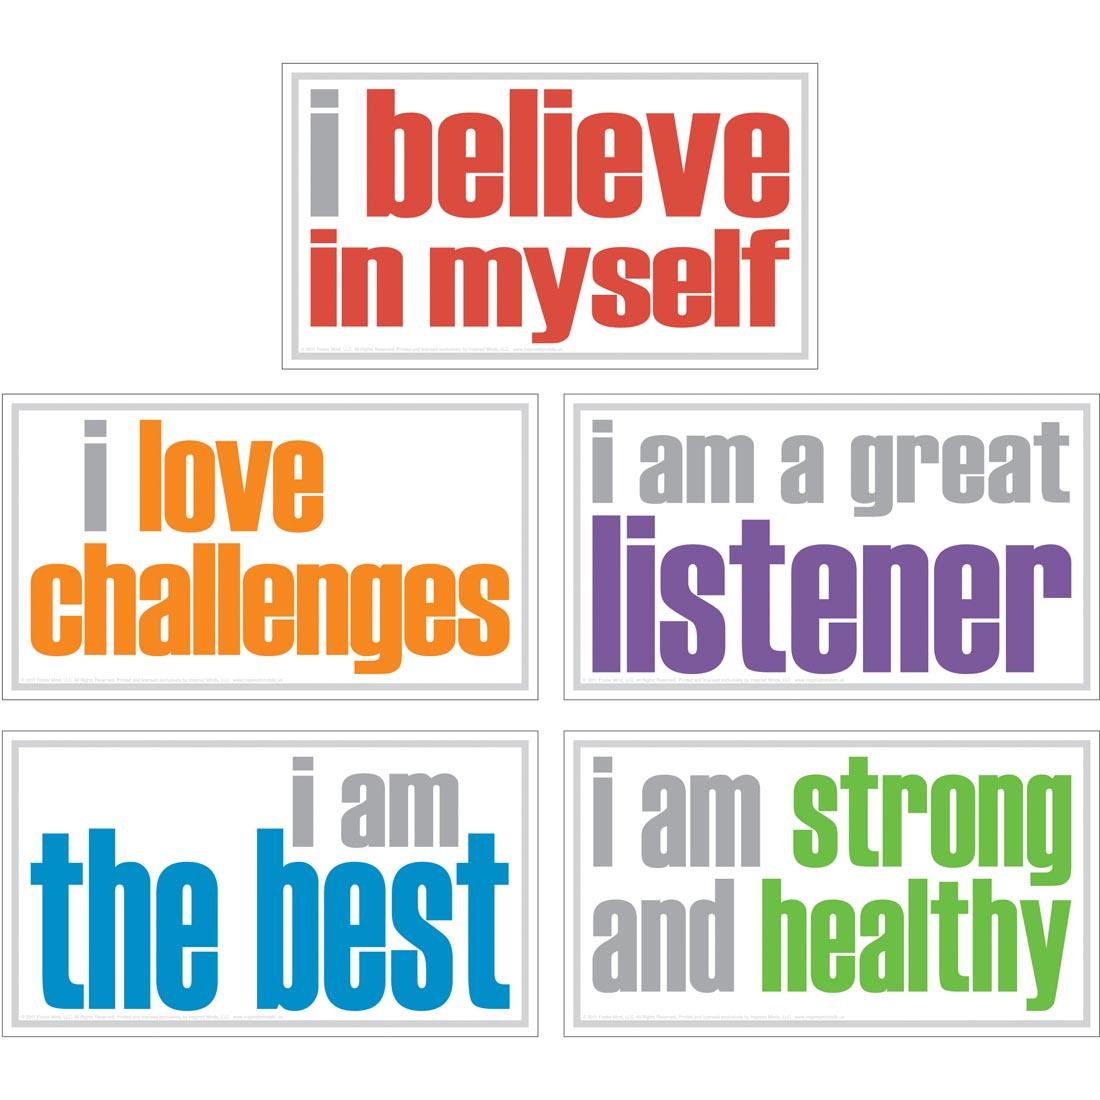 Inspired Minds Poster Set includes the messages I believe in myself, I love challenges, I am a great listener, I am the best, I am strong and healthy